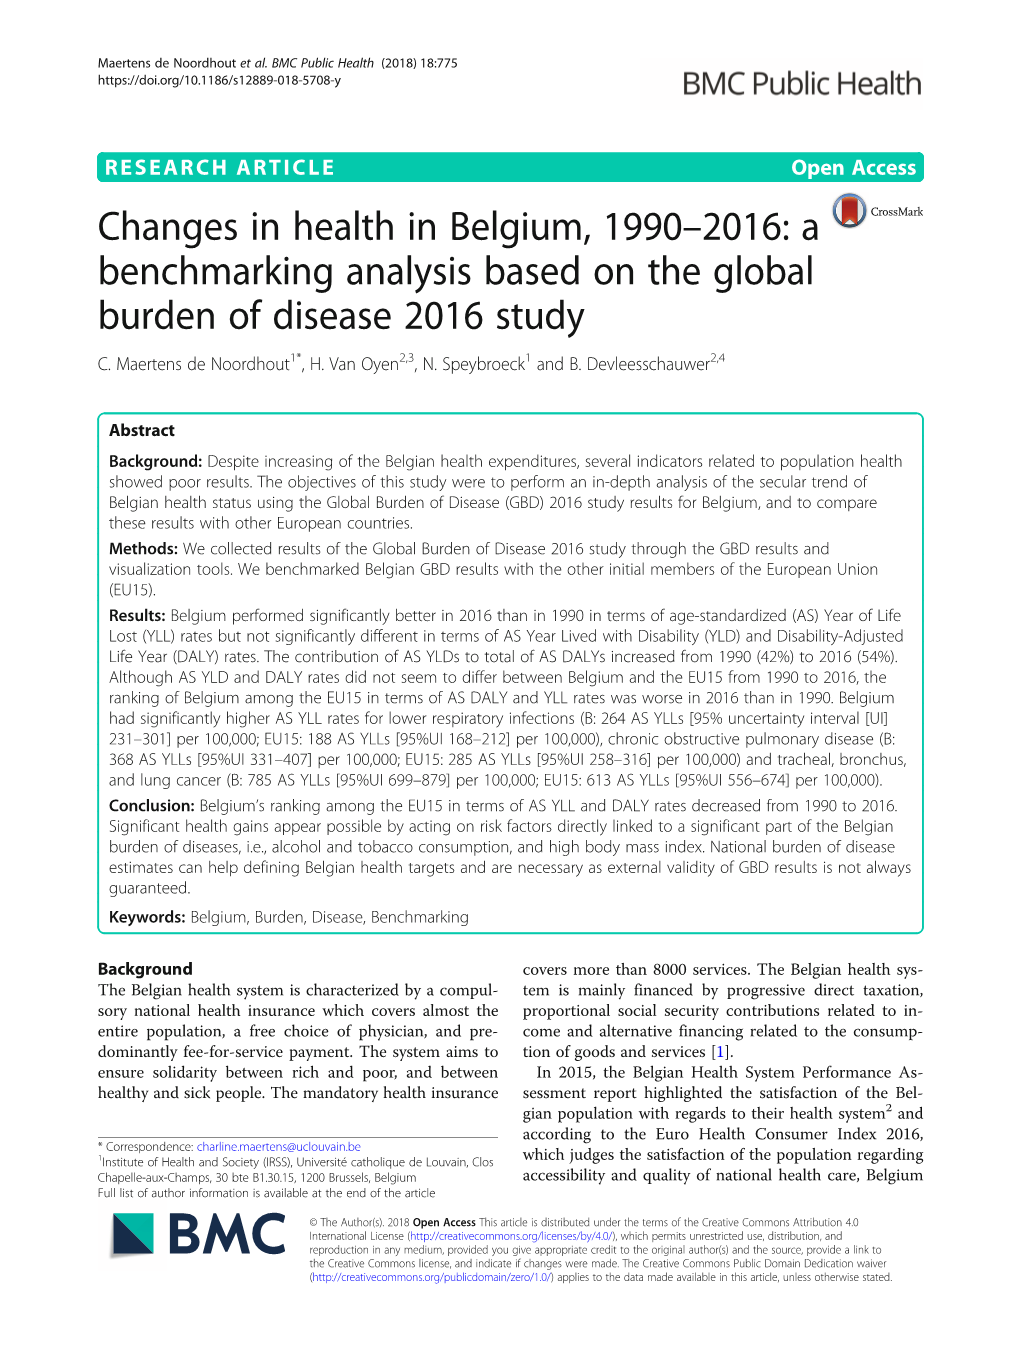 Changes in Health in Belgium, 1990–2016: a Benchmarking Analysis Based on the Global Burden of Disease 2016 Study C